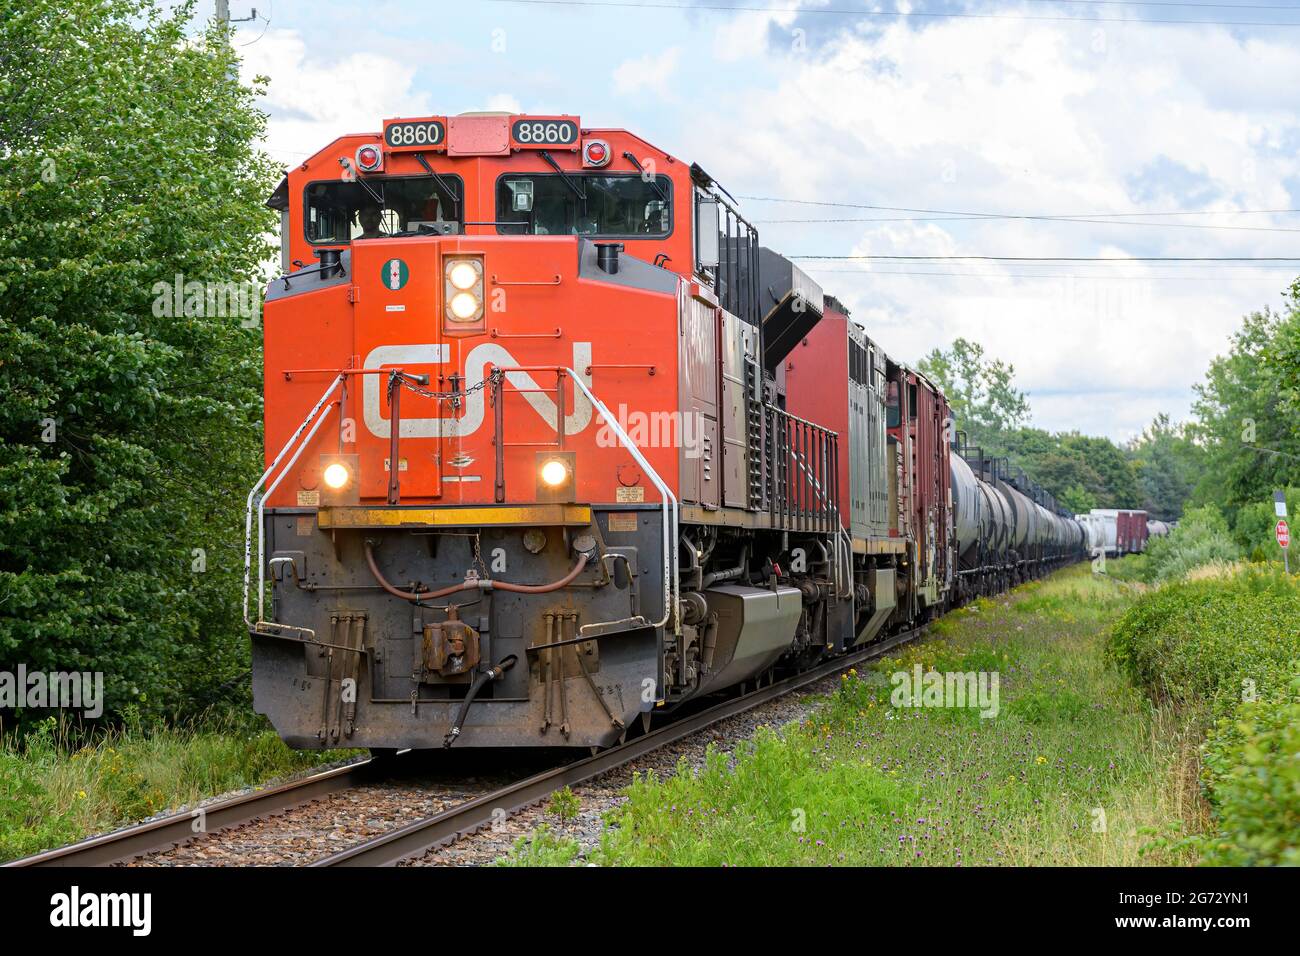 Saint John, NB, Canada - August 6, 2021: A Canadian National Railway train on an overcast say. Lights are on, trees and grass around tracks. Stock Photo